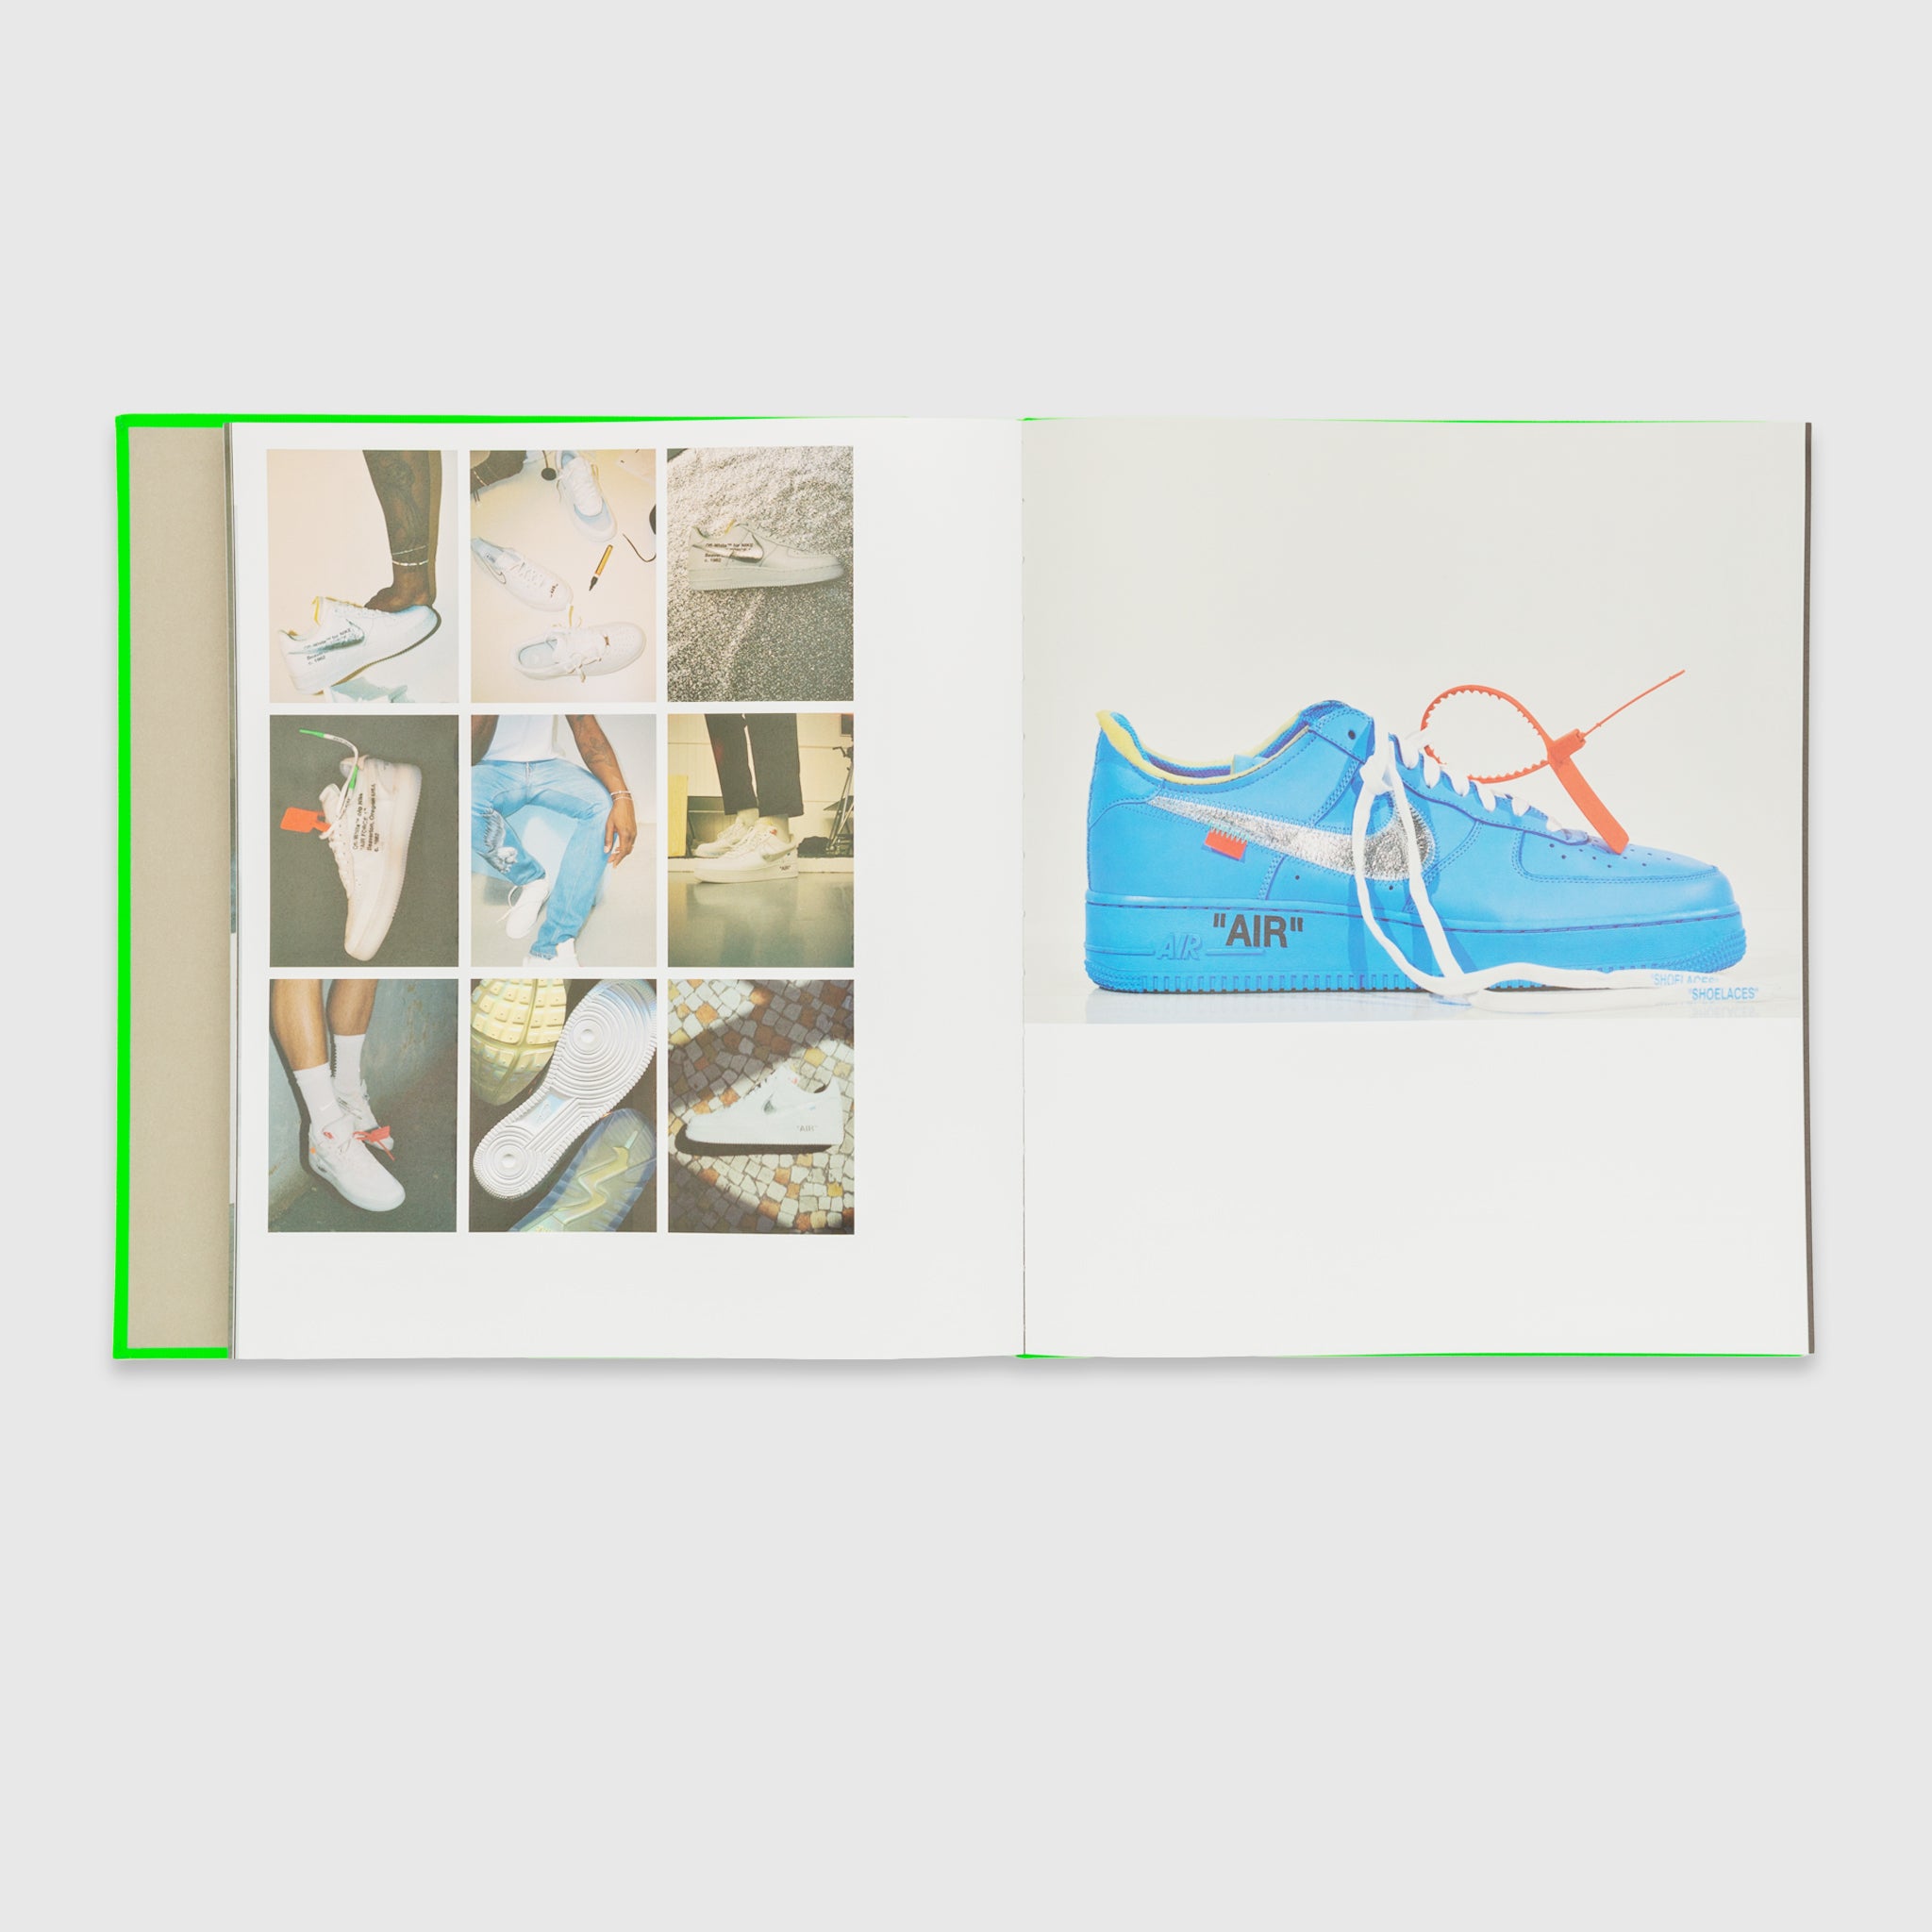 ICONS "SOMETHING'S OFF" BY VIRGIL ABLOH